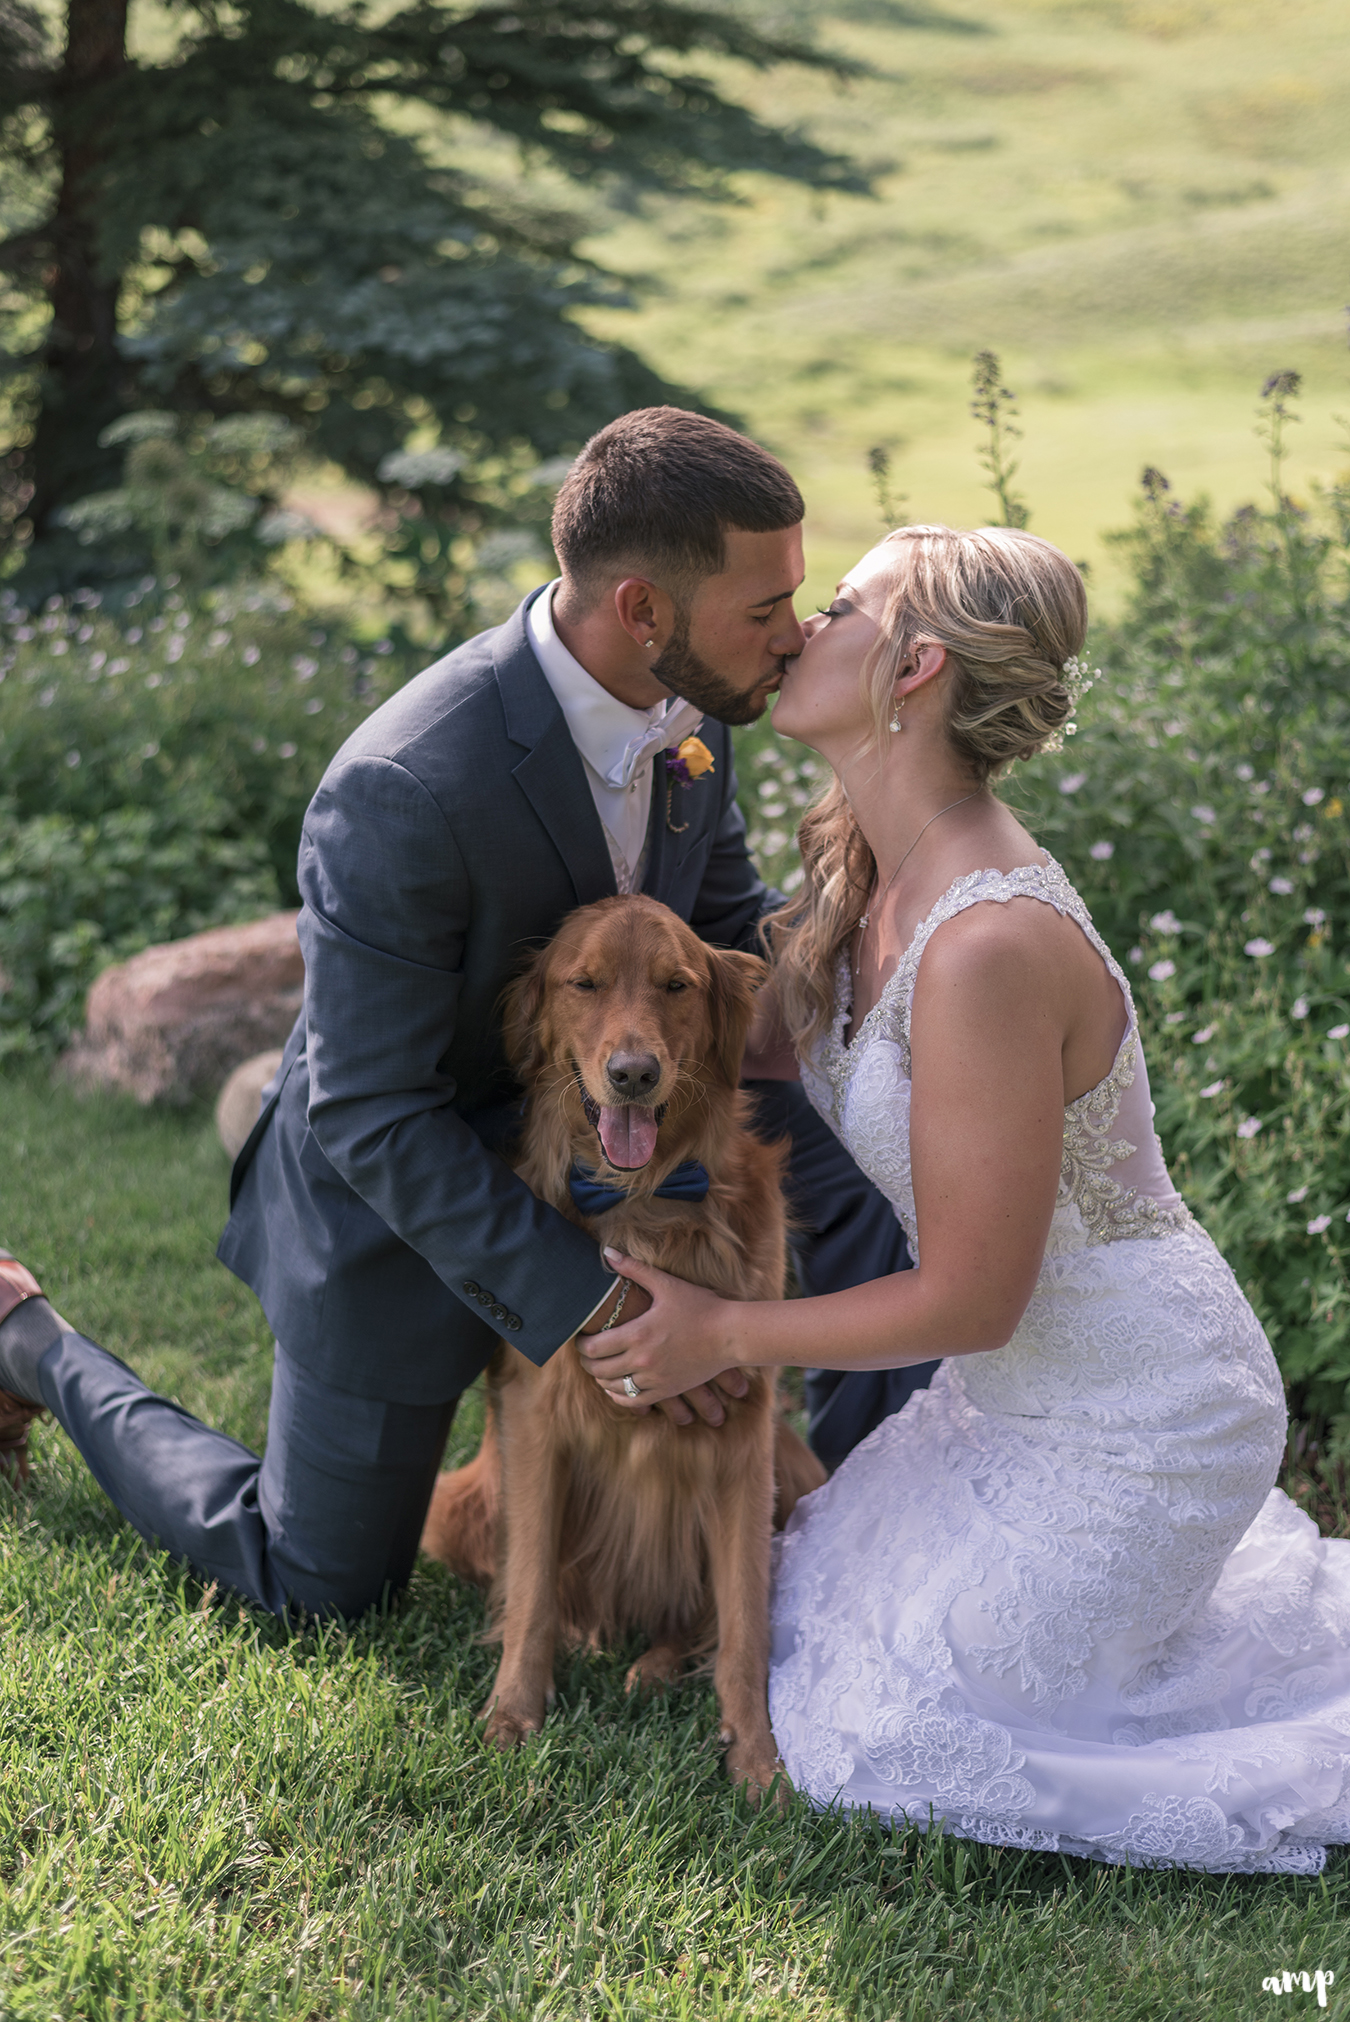 Bride and groom share a kiss over their dog